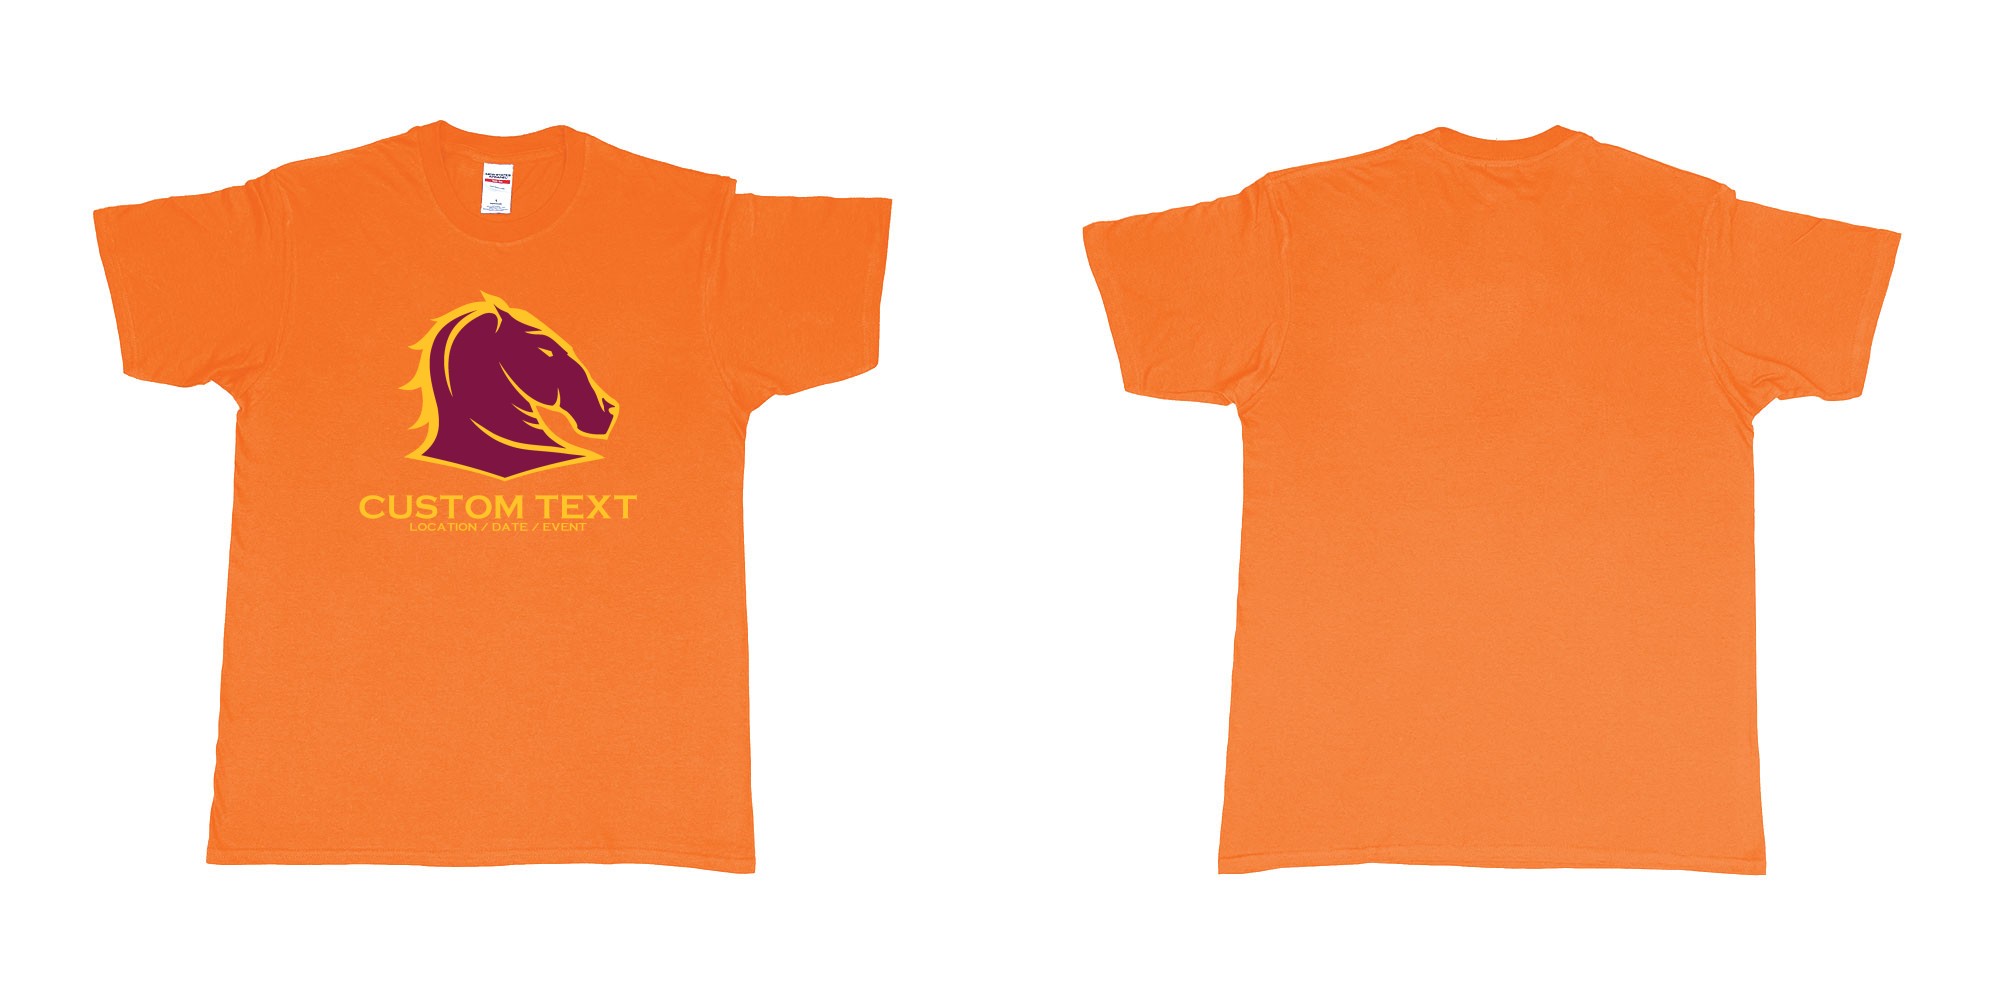 Custom tshirt design brisbane broncos australian professional rugby league football club queensland in fabric color orange choice your own text made in Bali by The Pirate Way